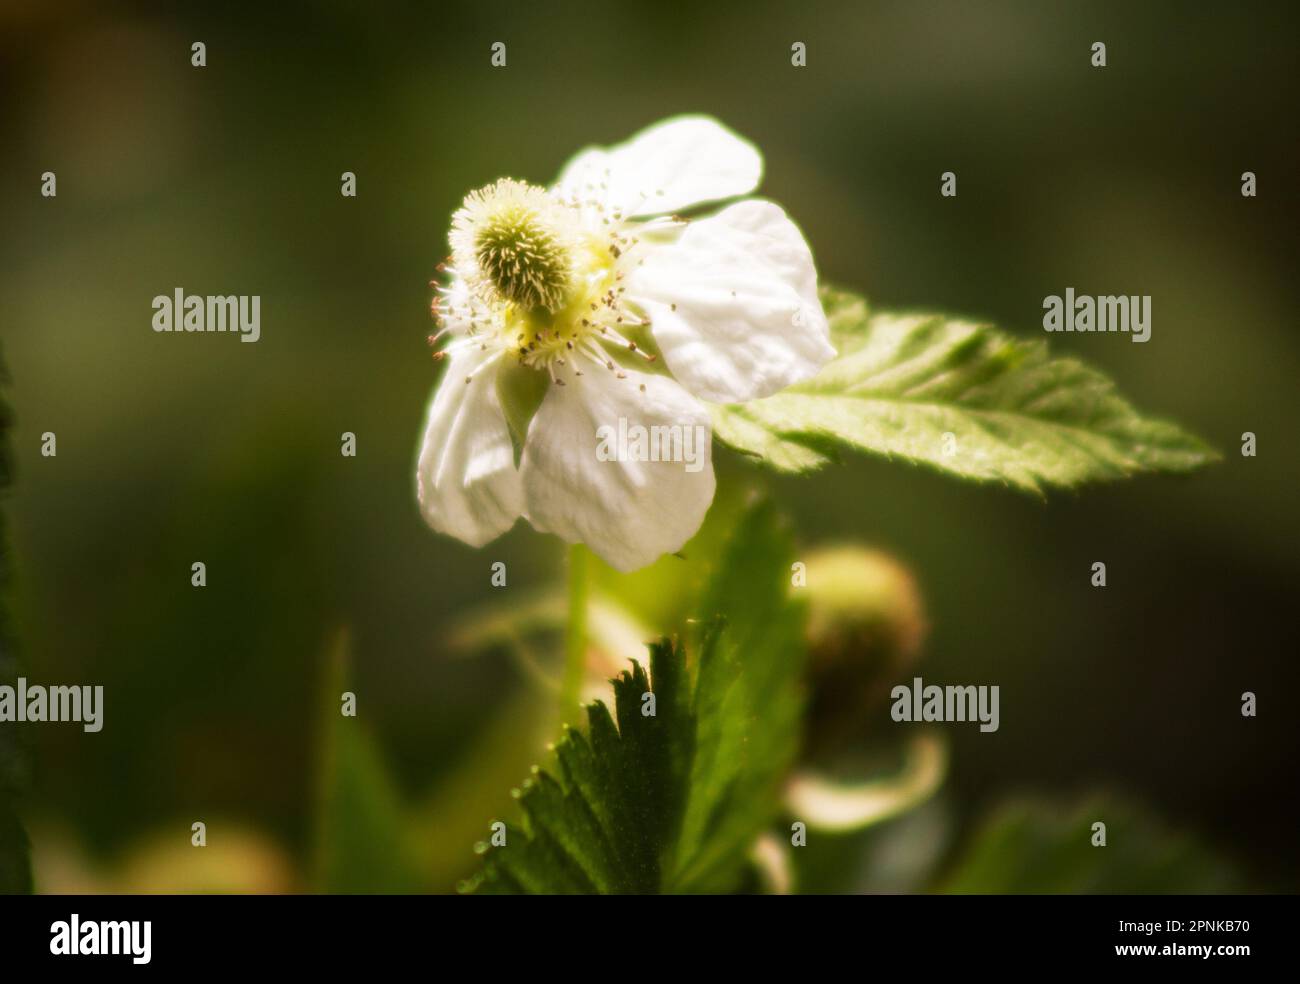 Raspberry plant and flower on natural background Stock Photo